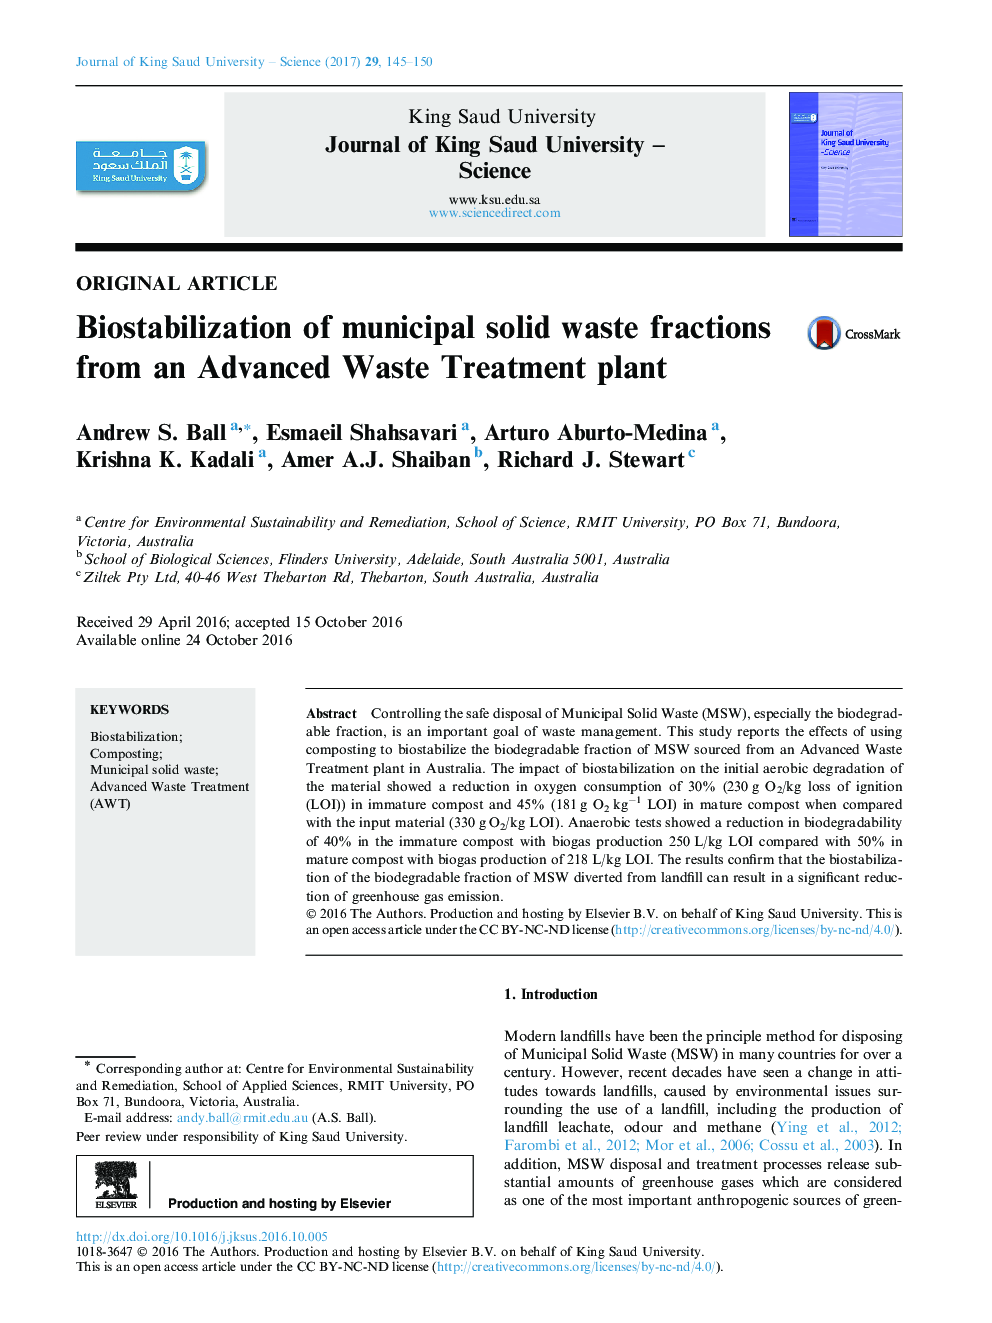 Original articleBiostabilization of municipal solid waste fractions from an Advanced Waste Treatment plant